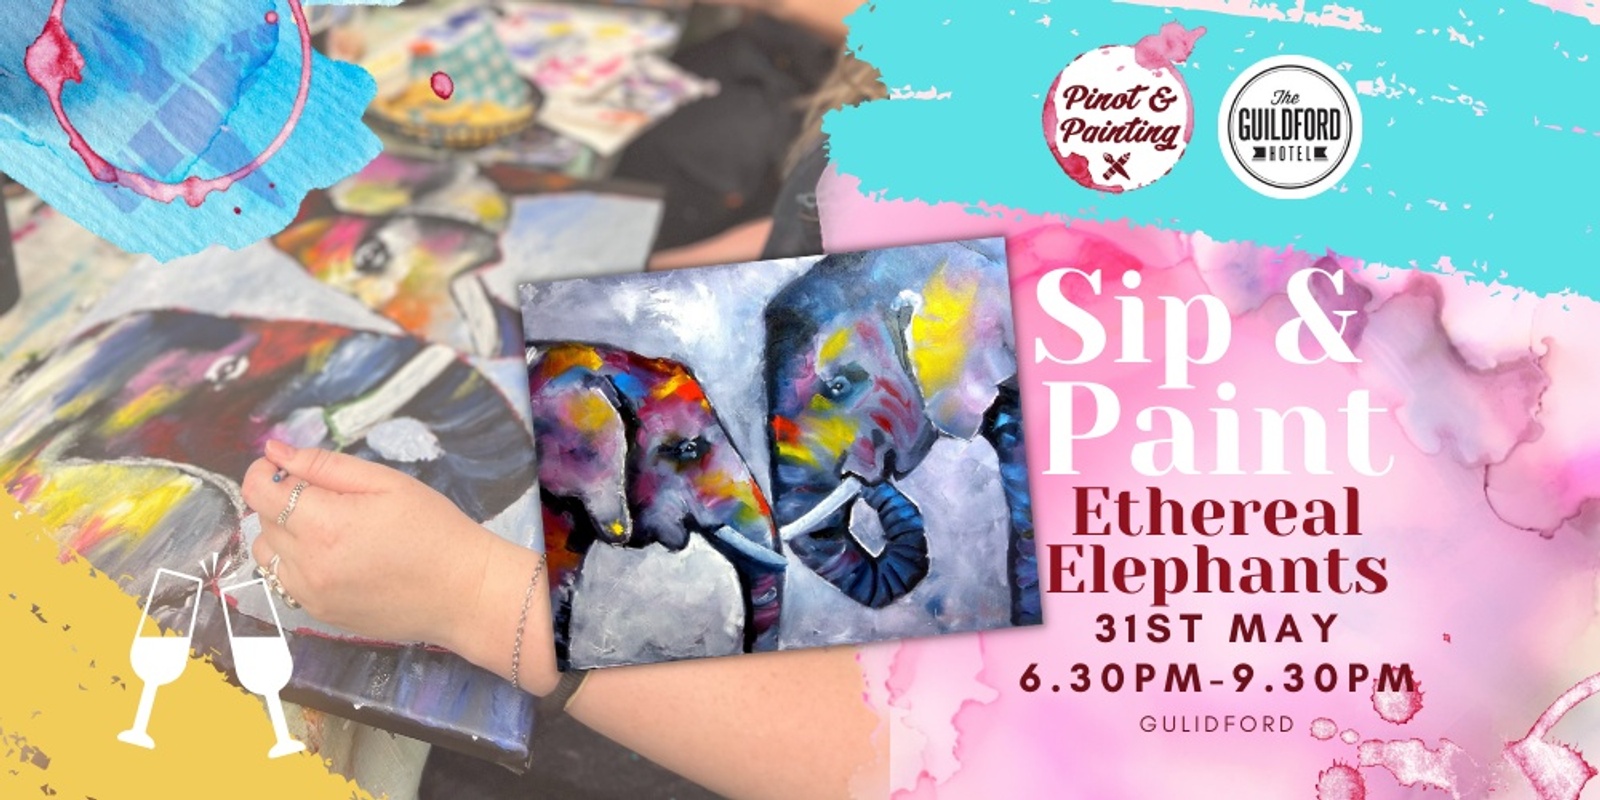 Ethereal Elephants - Sip & Paint @ The Guildford Hotel